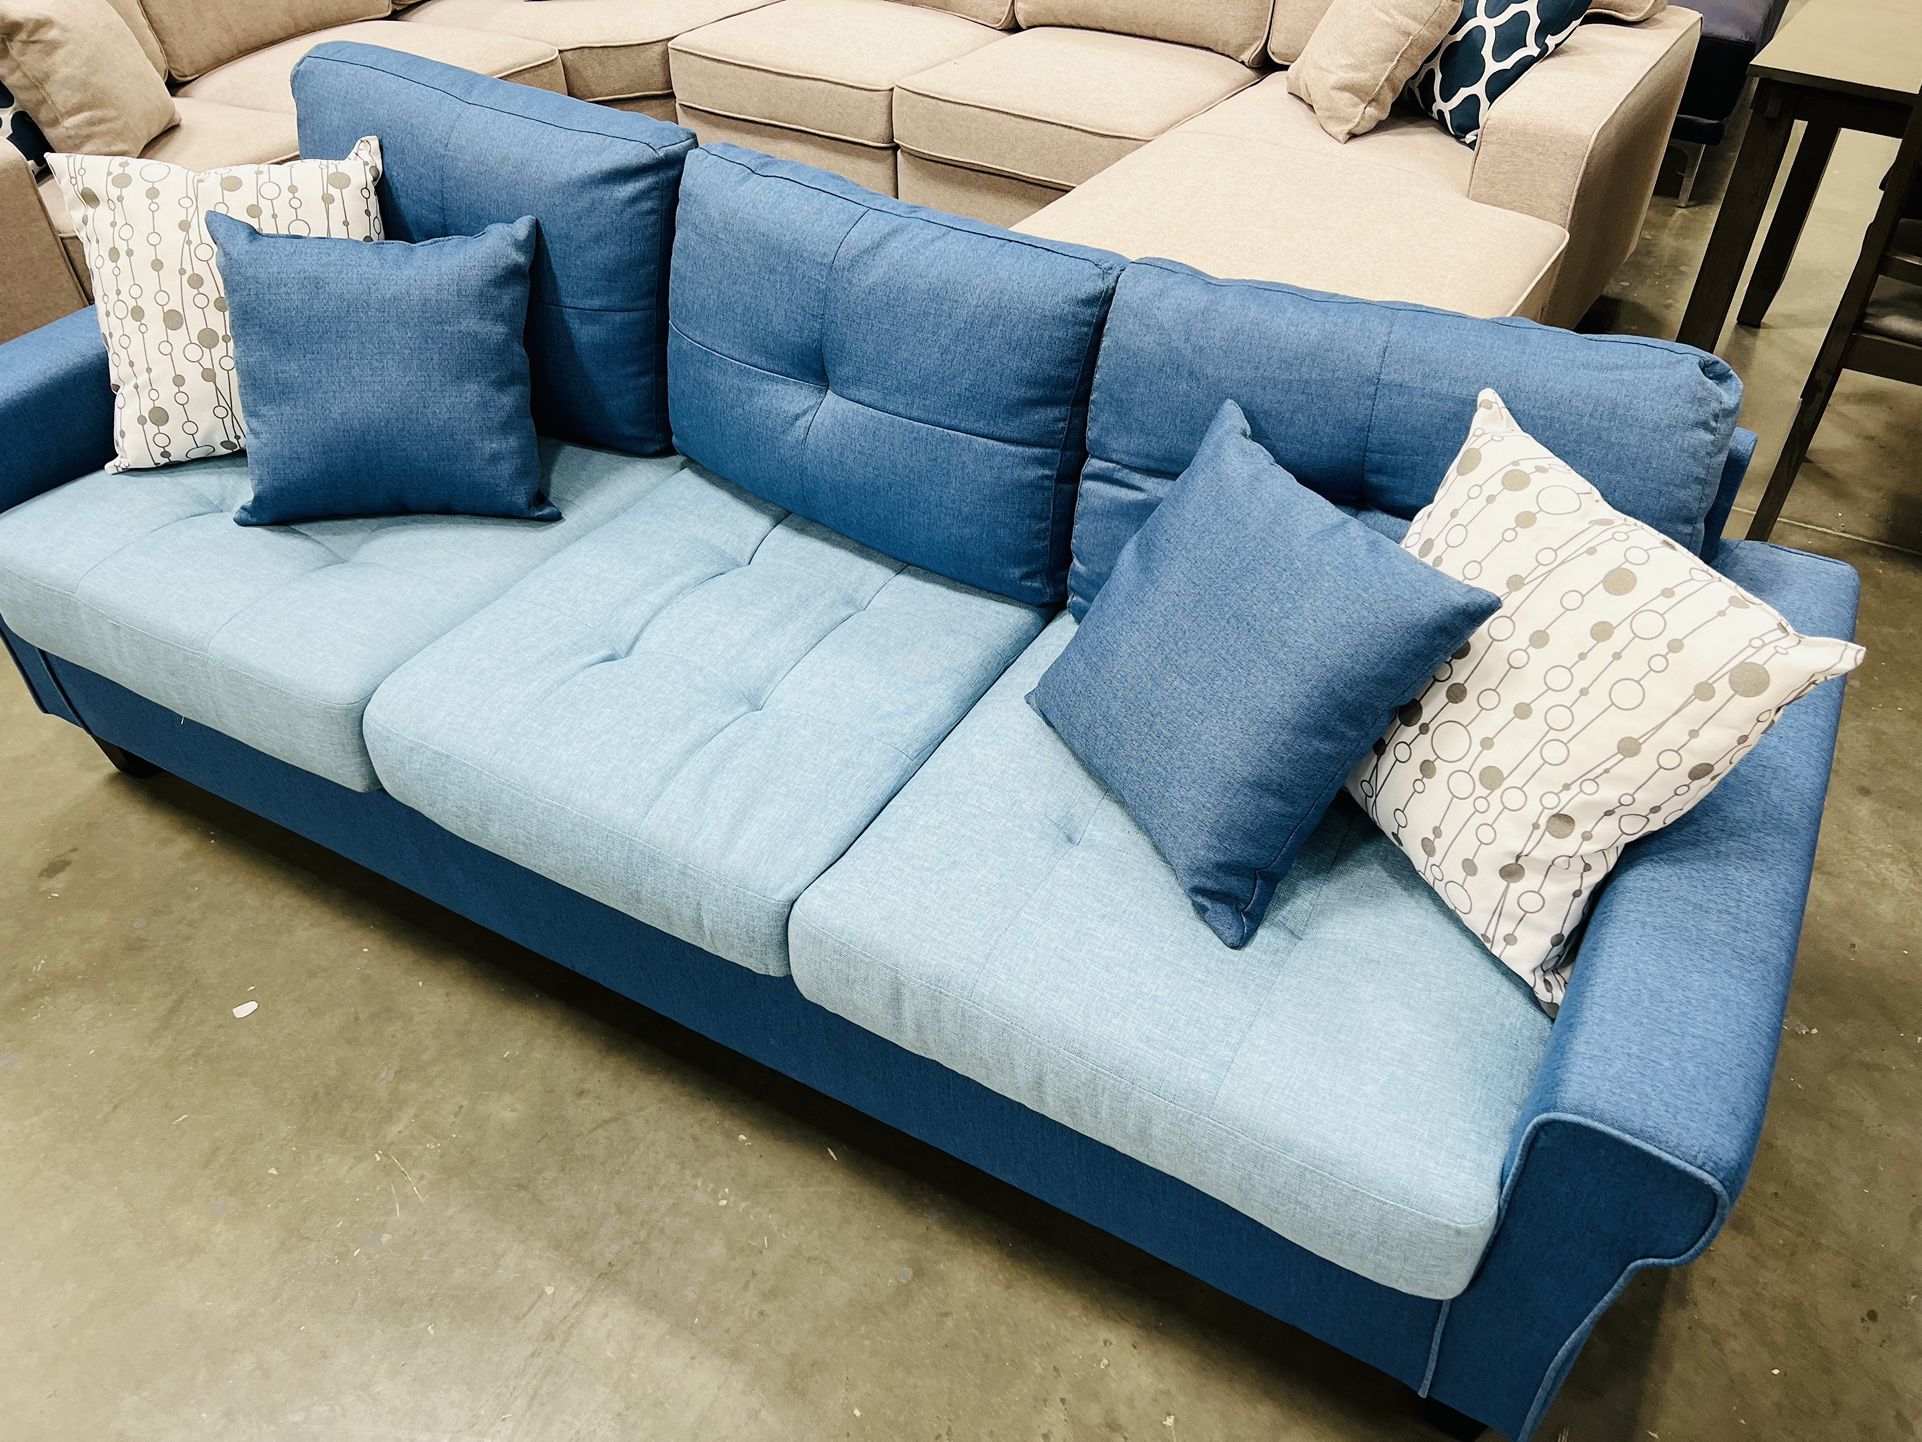 !!New!! 3 Seater Sofa, Sofa, Couch, Small Living Room Sofa, Game Room Sofa Couch, Loveseat, Blue Couch 